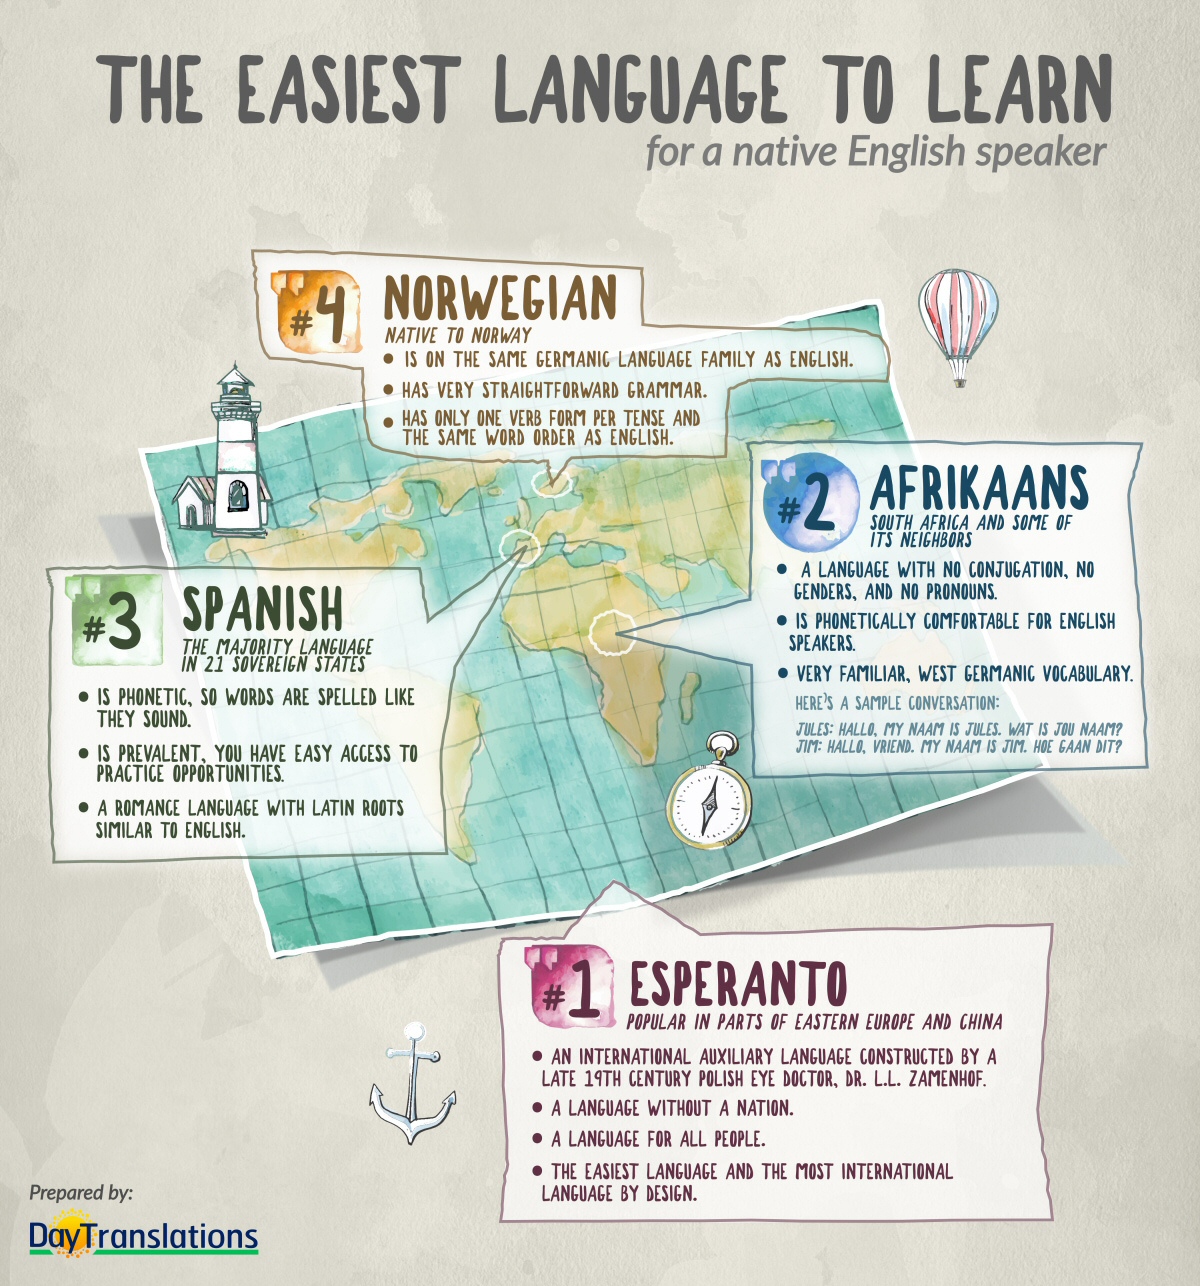 Seven Easiest Languages to Learn for English Speakers